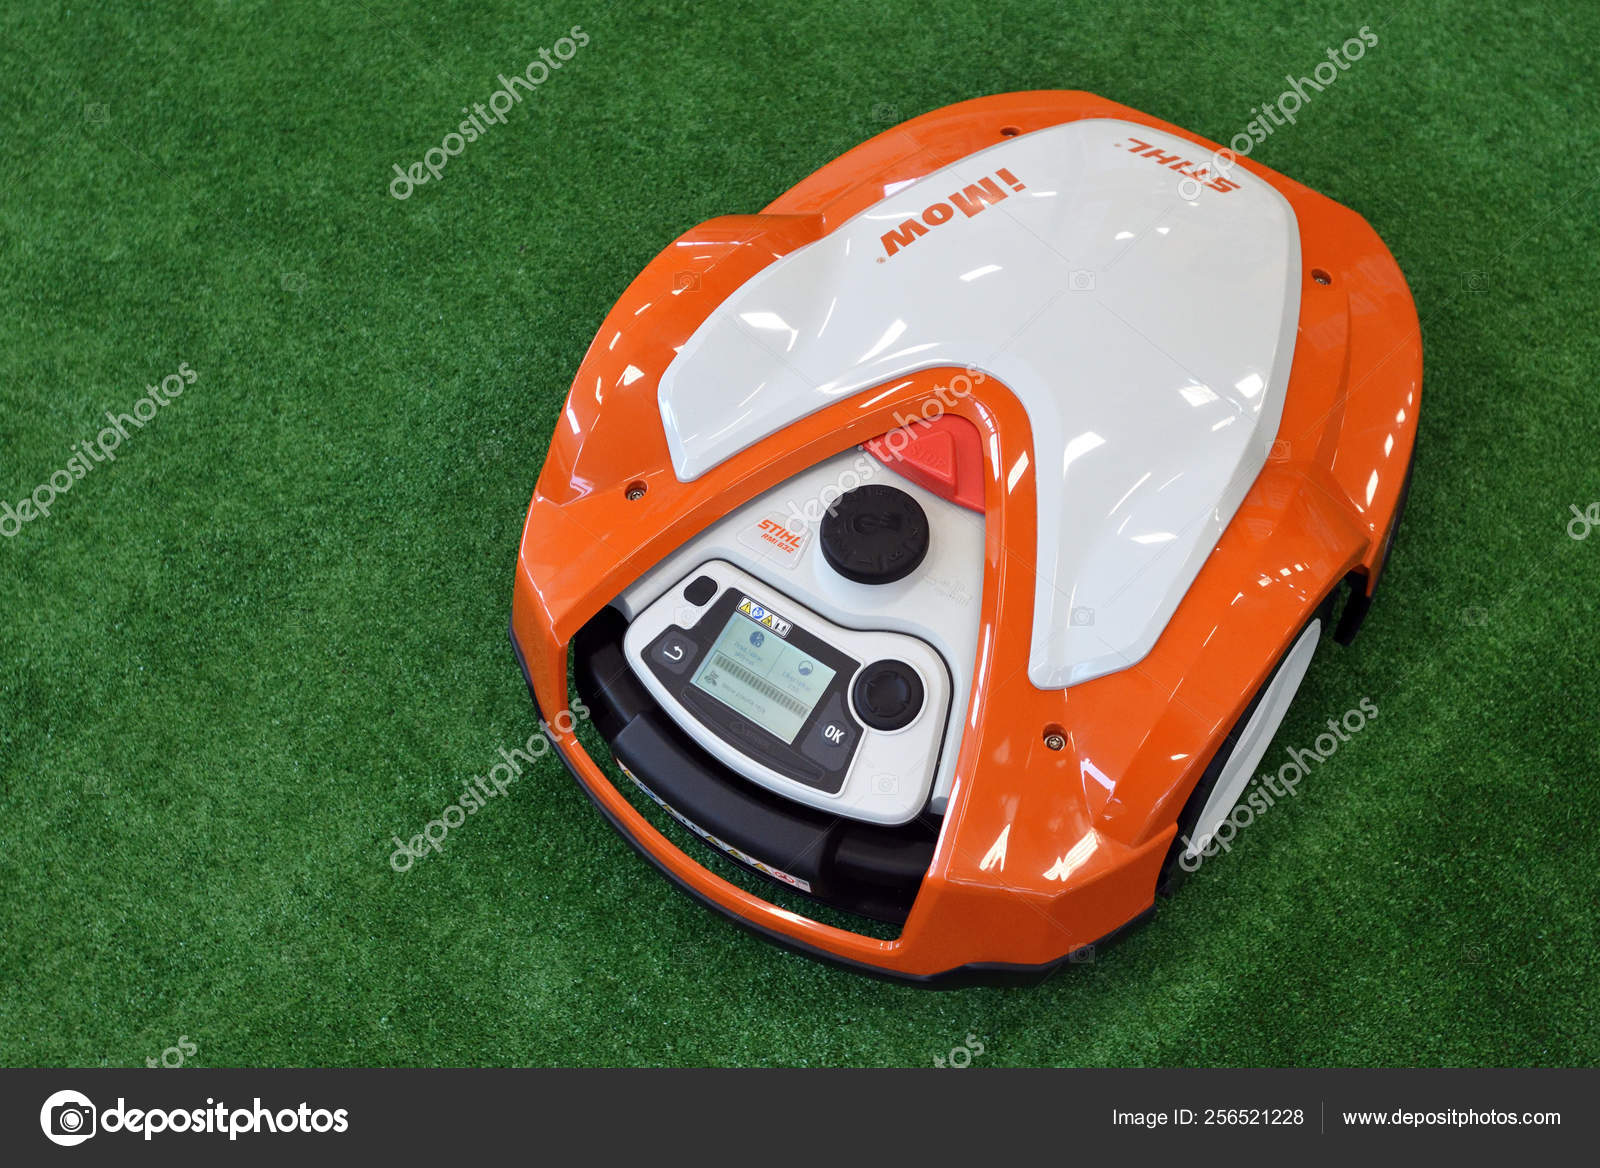 IMow Robotic Lawn Mower from STIHL – Stock Editorial Photo © _fla #256521228